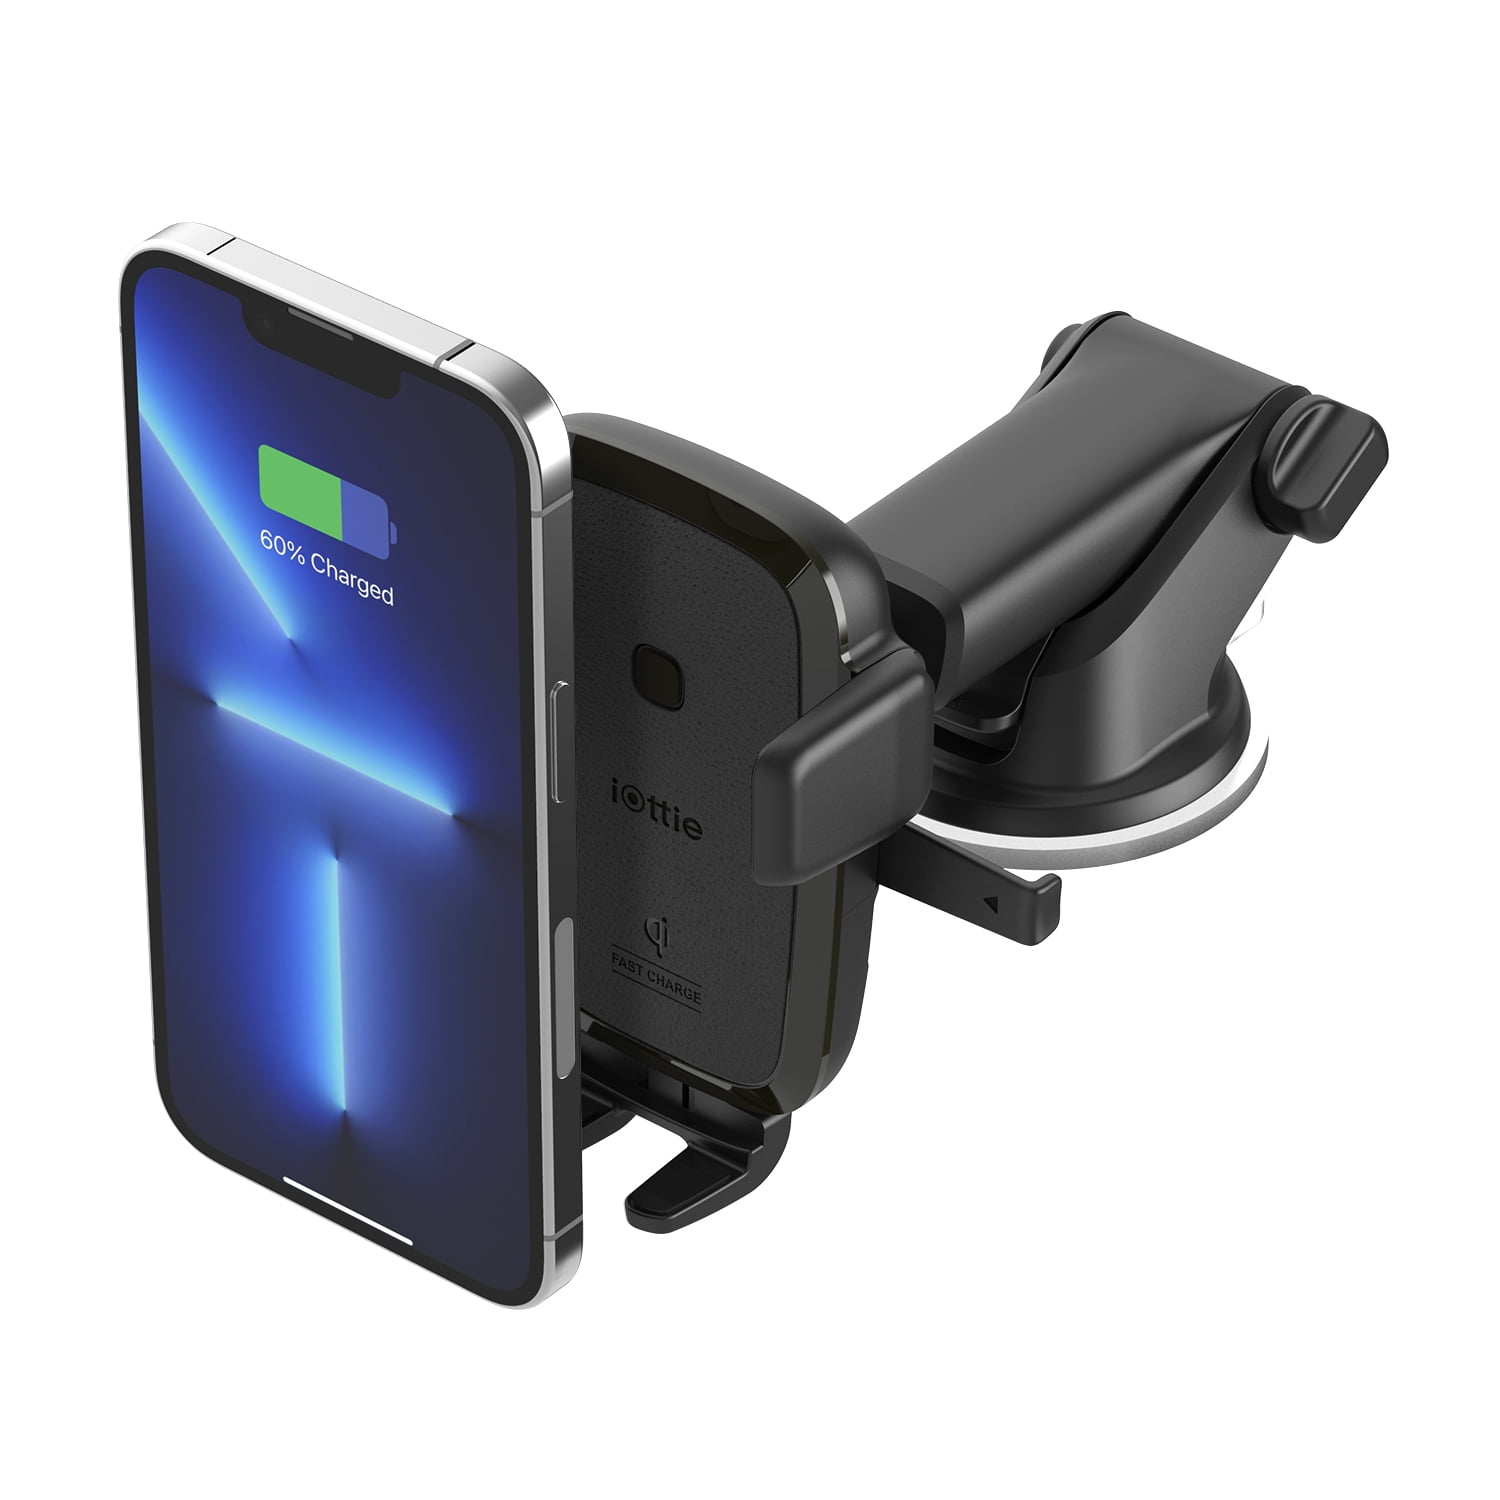 Review: iottie Easy One Touch 5 Dash/Windshield Smartphone Mount